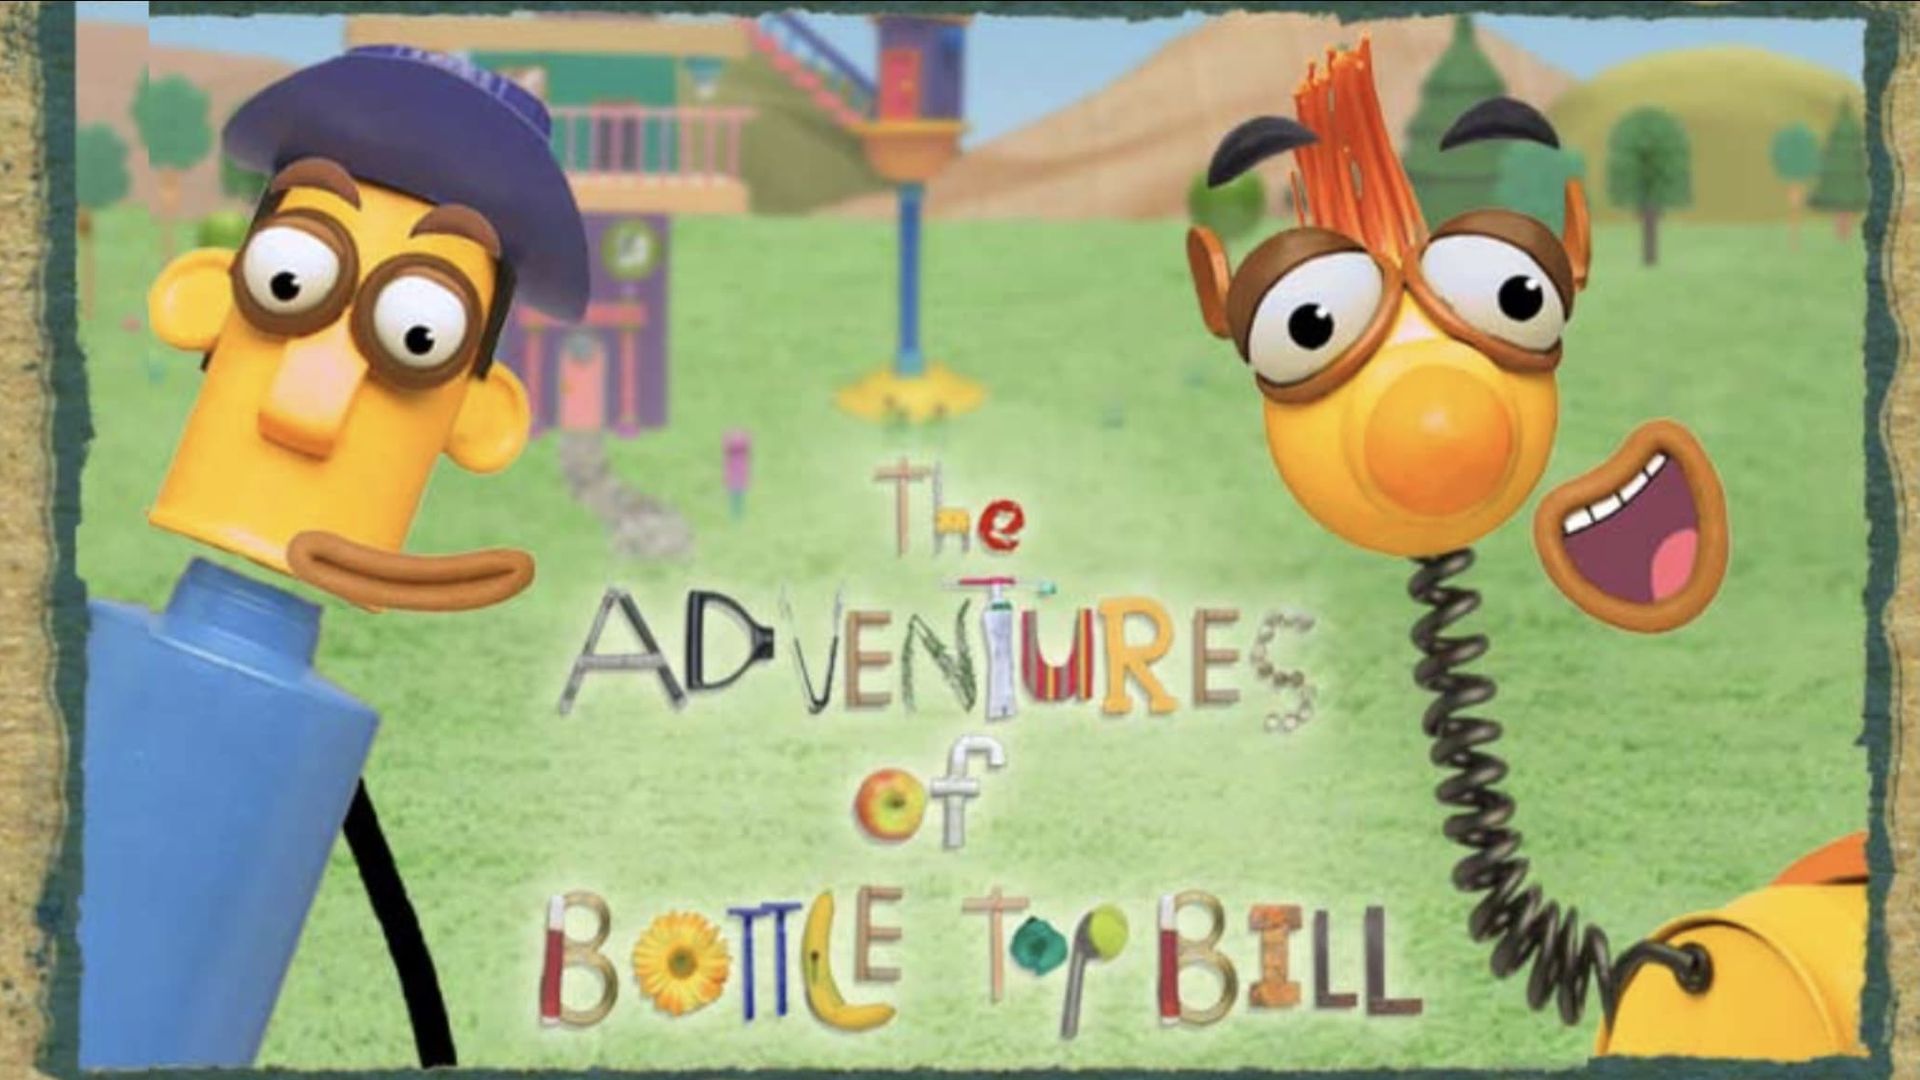 The Adventures of Bottle Top Bill background